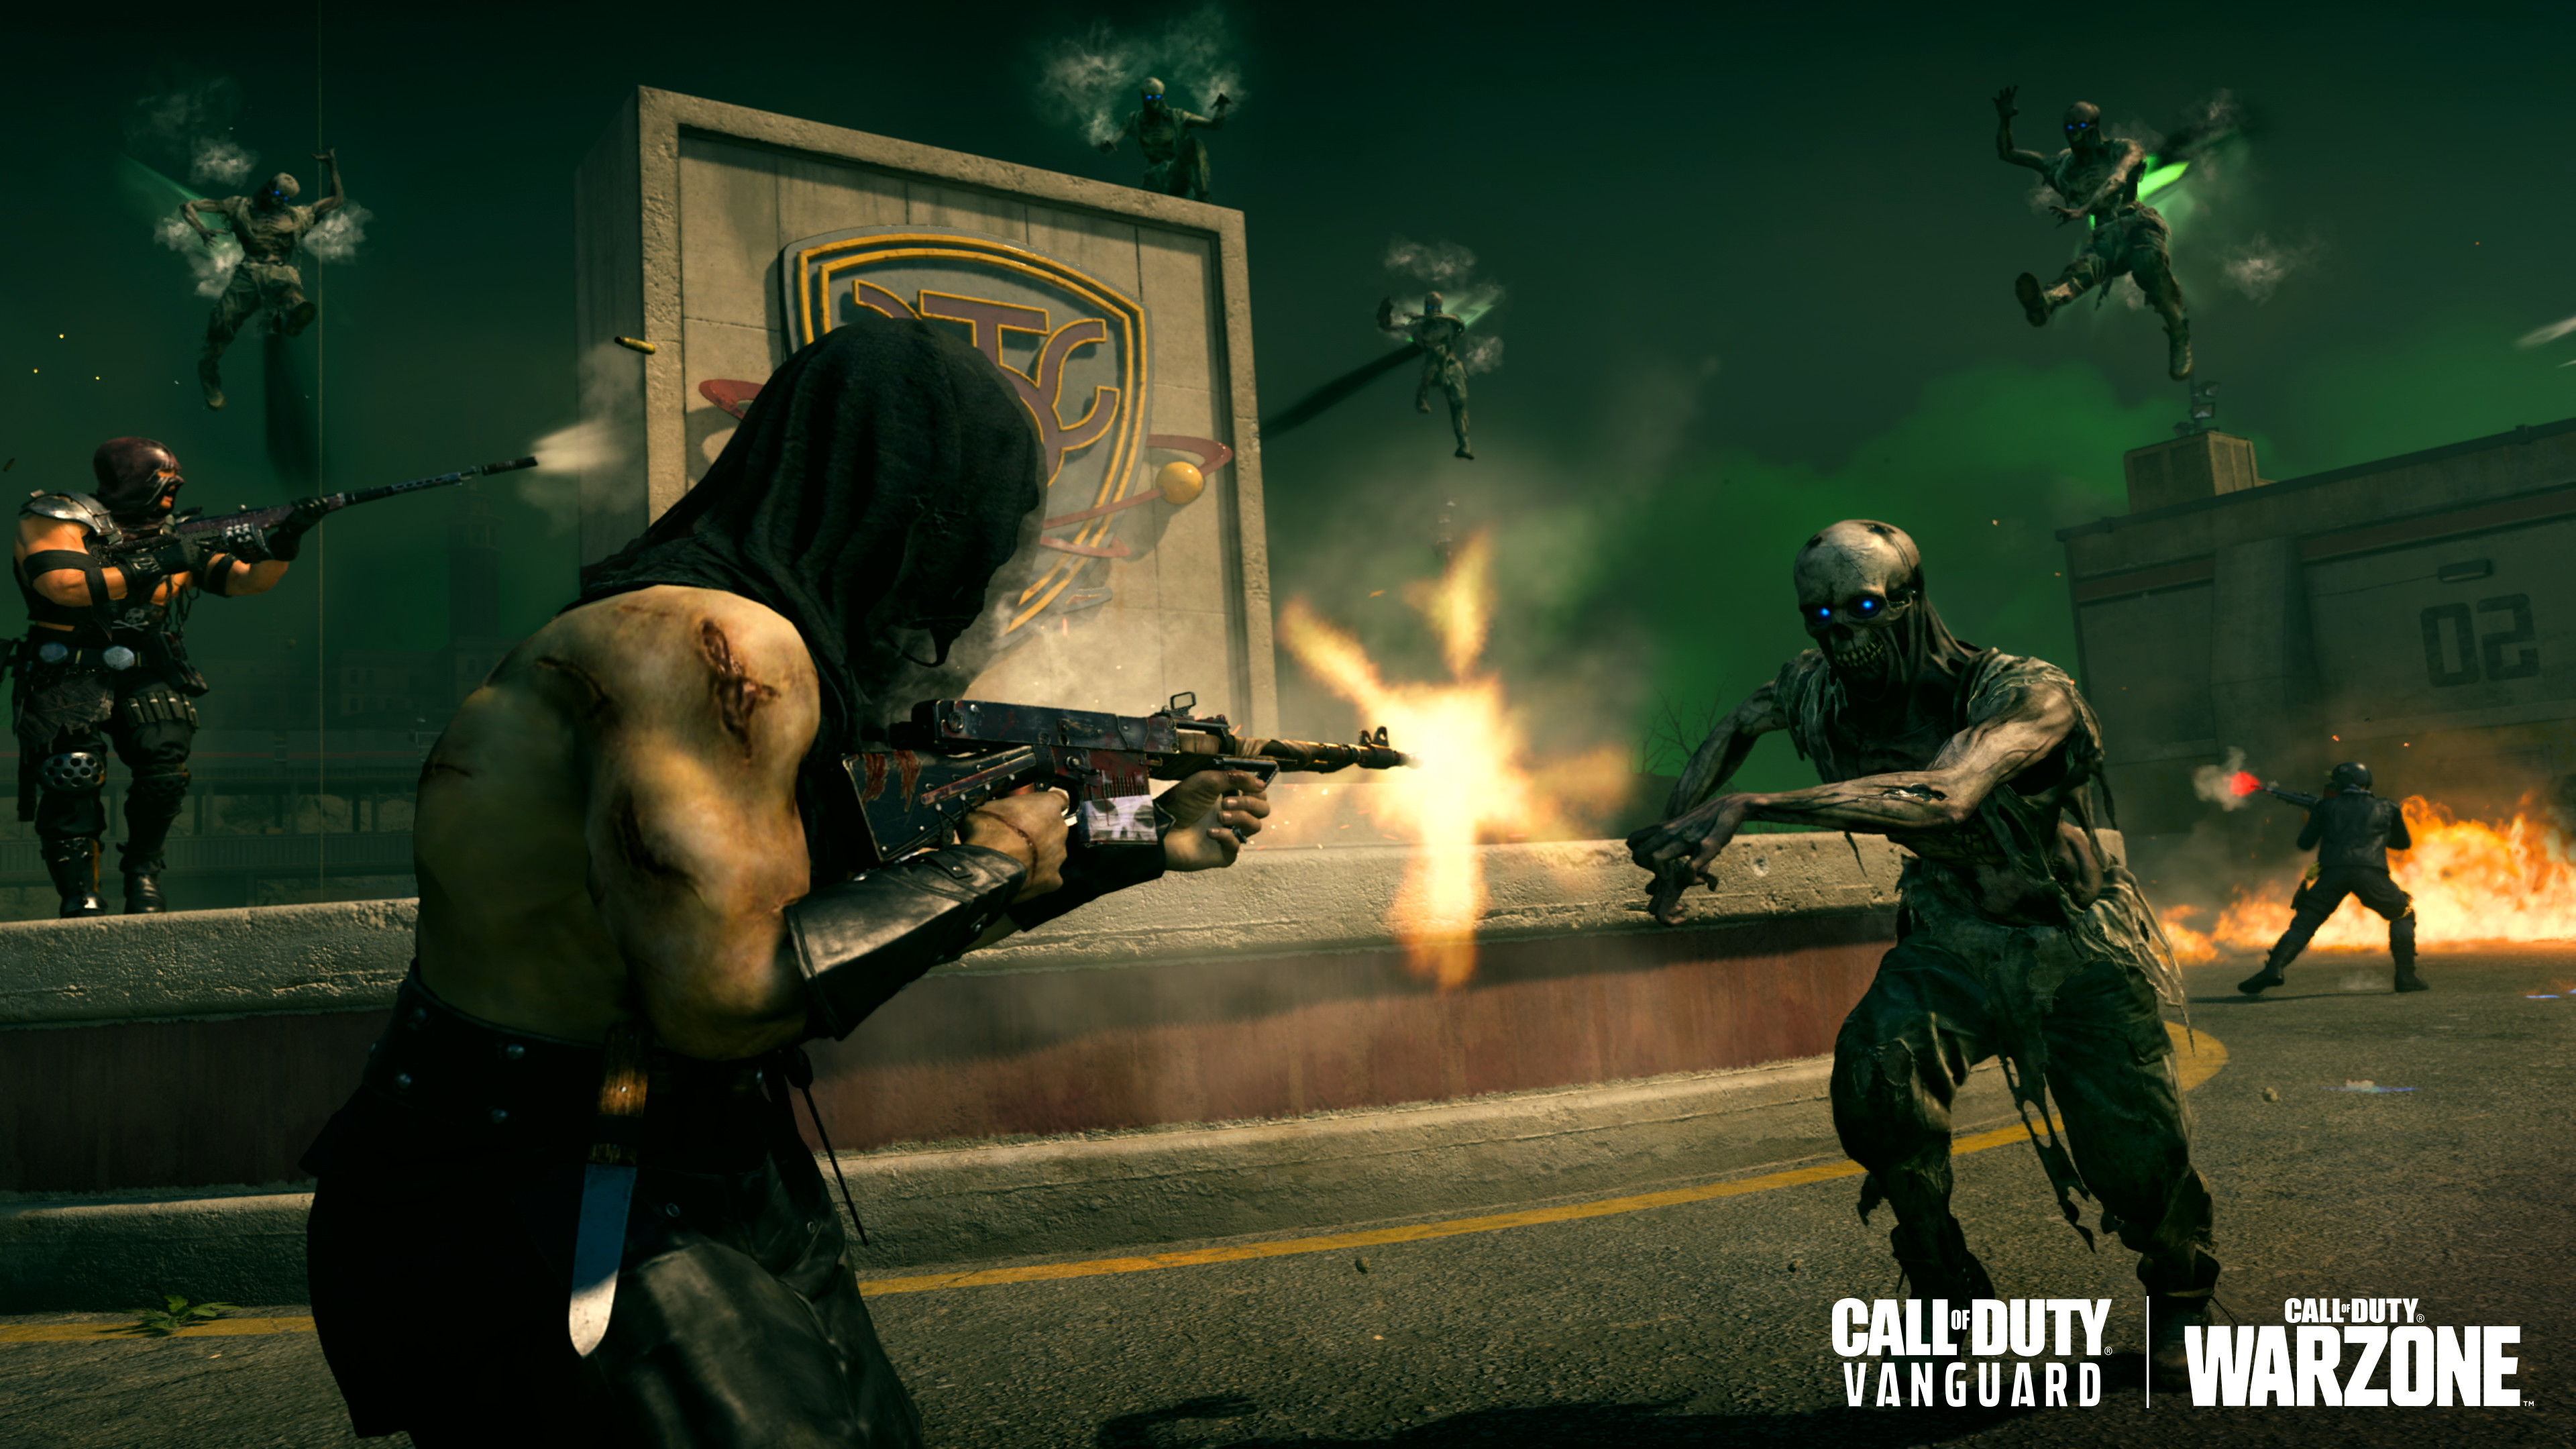 Call of Duty: Warzone will bring back popular zombie mode for a limited time to Rebirth Island.